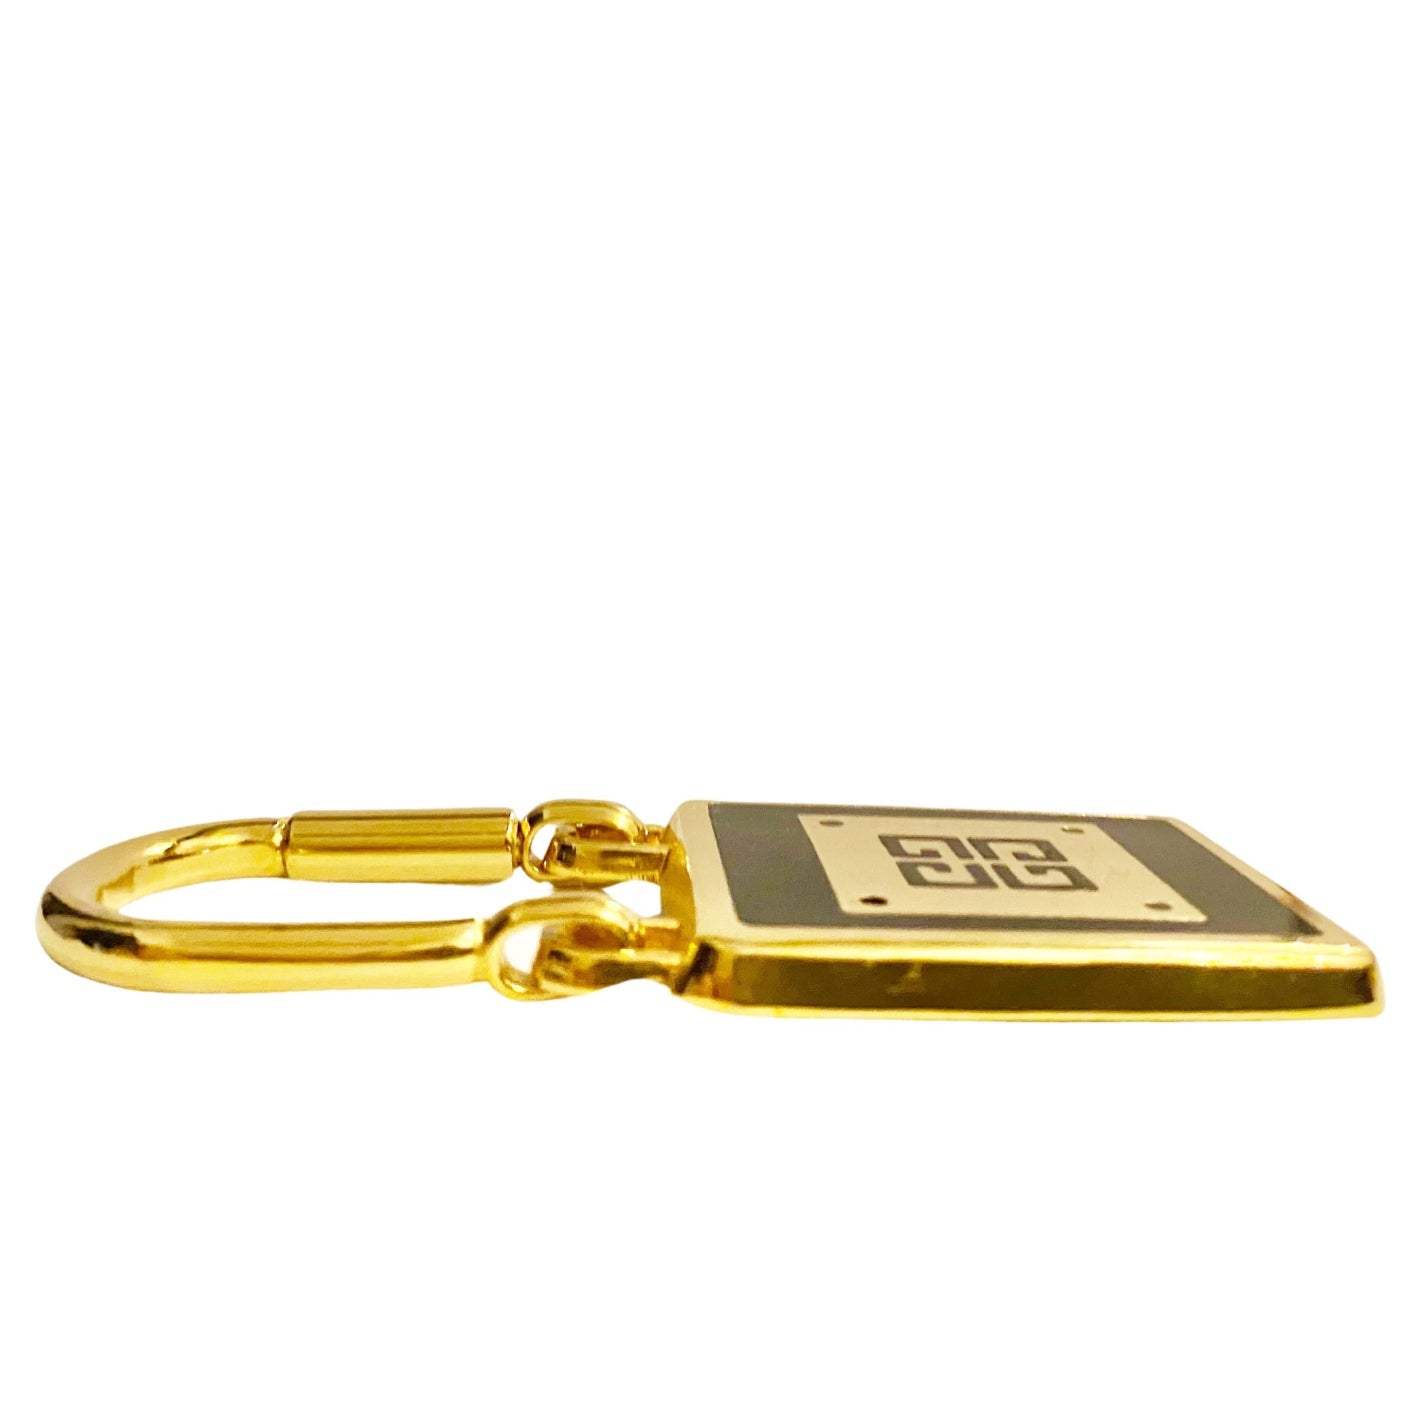 1980s Givenchy Gold Metal Keyring - style - CHNGR